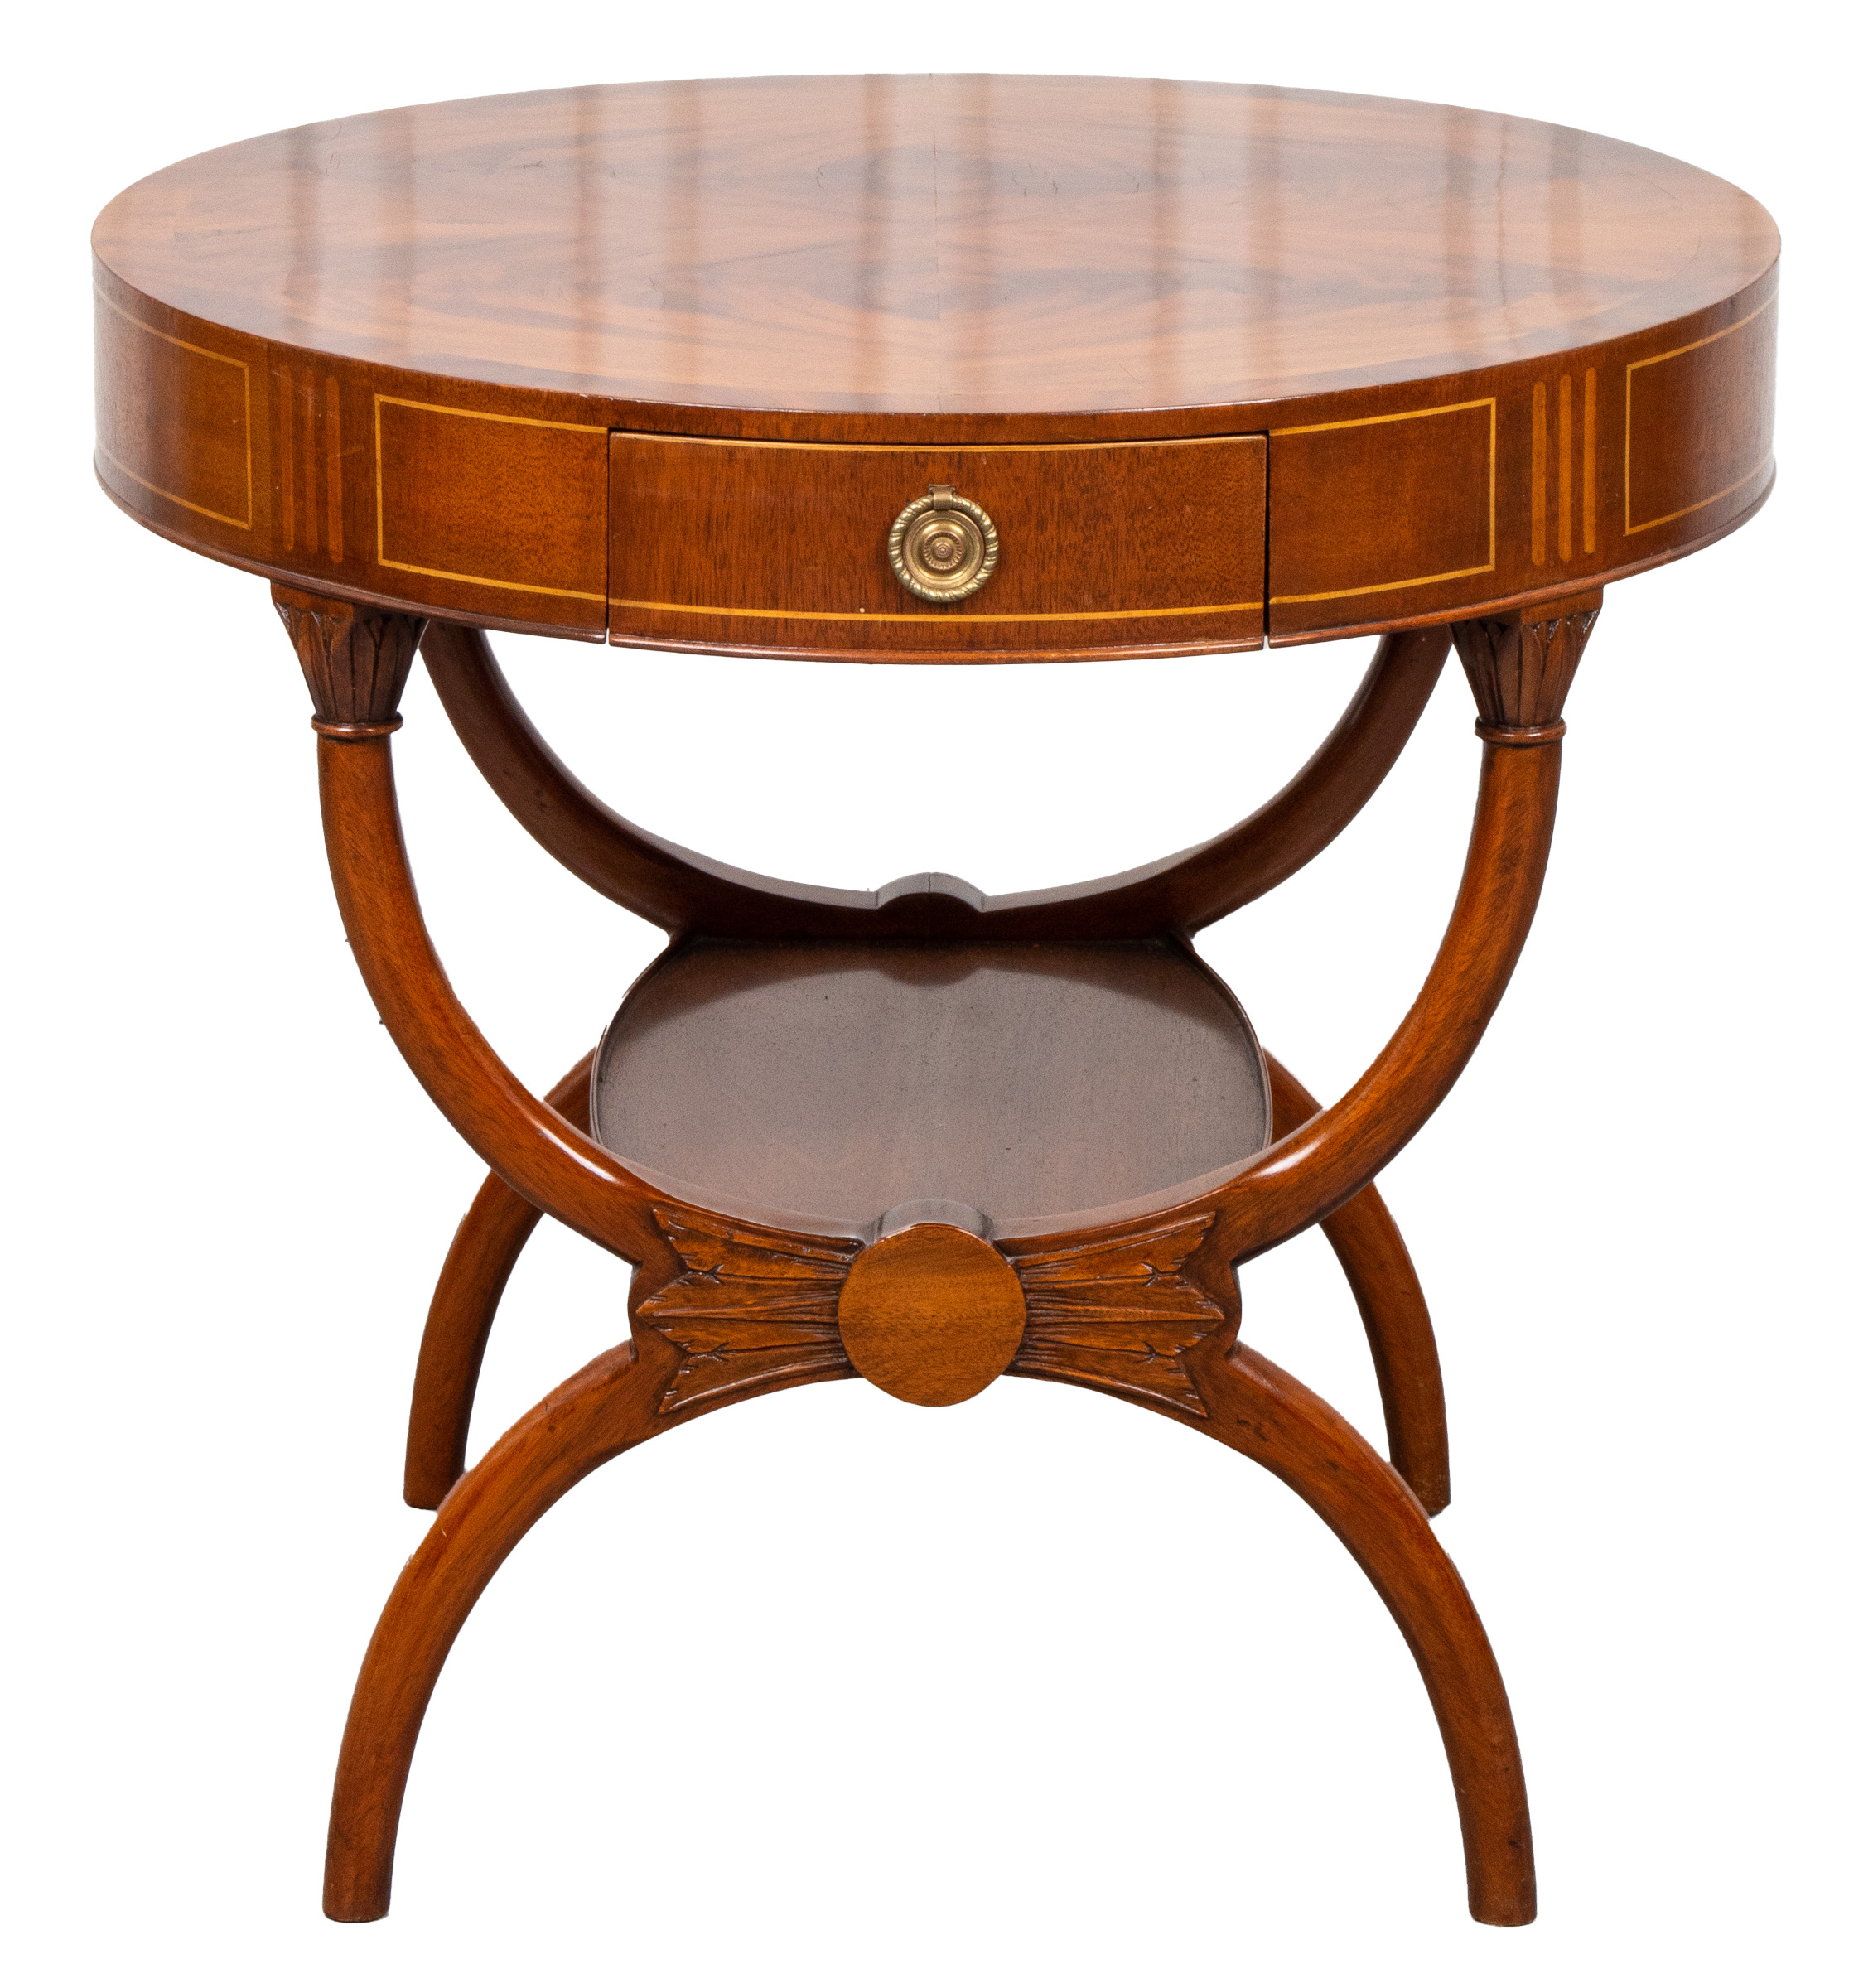 REGENCY INLAID OCCASIONAL TABLE